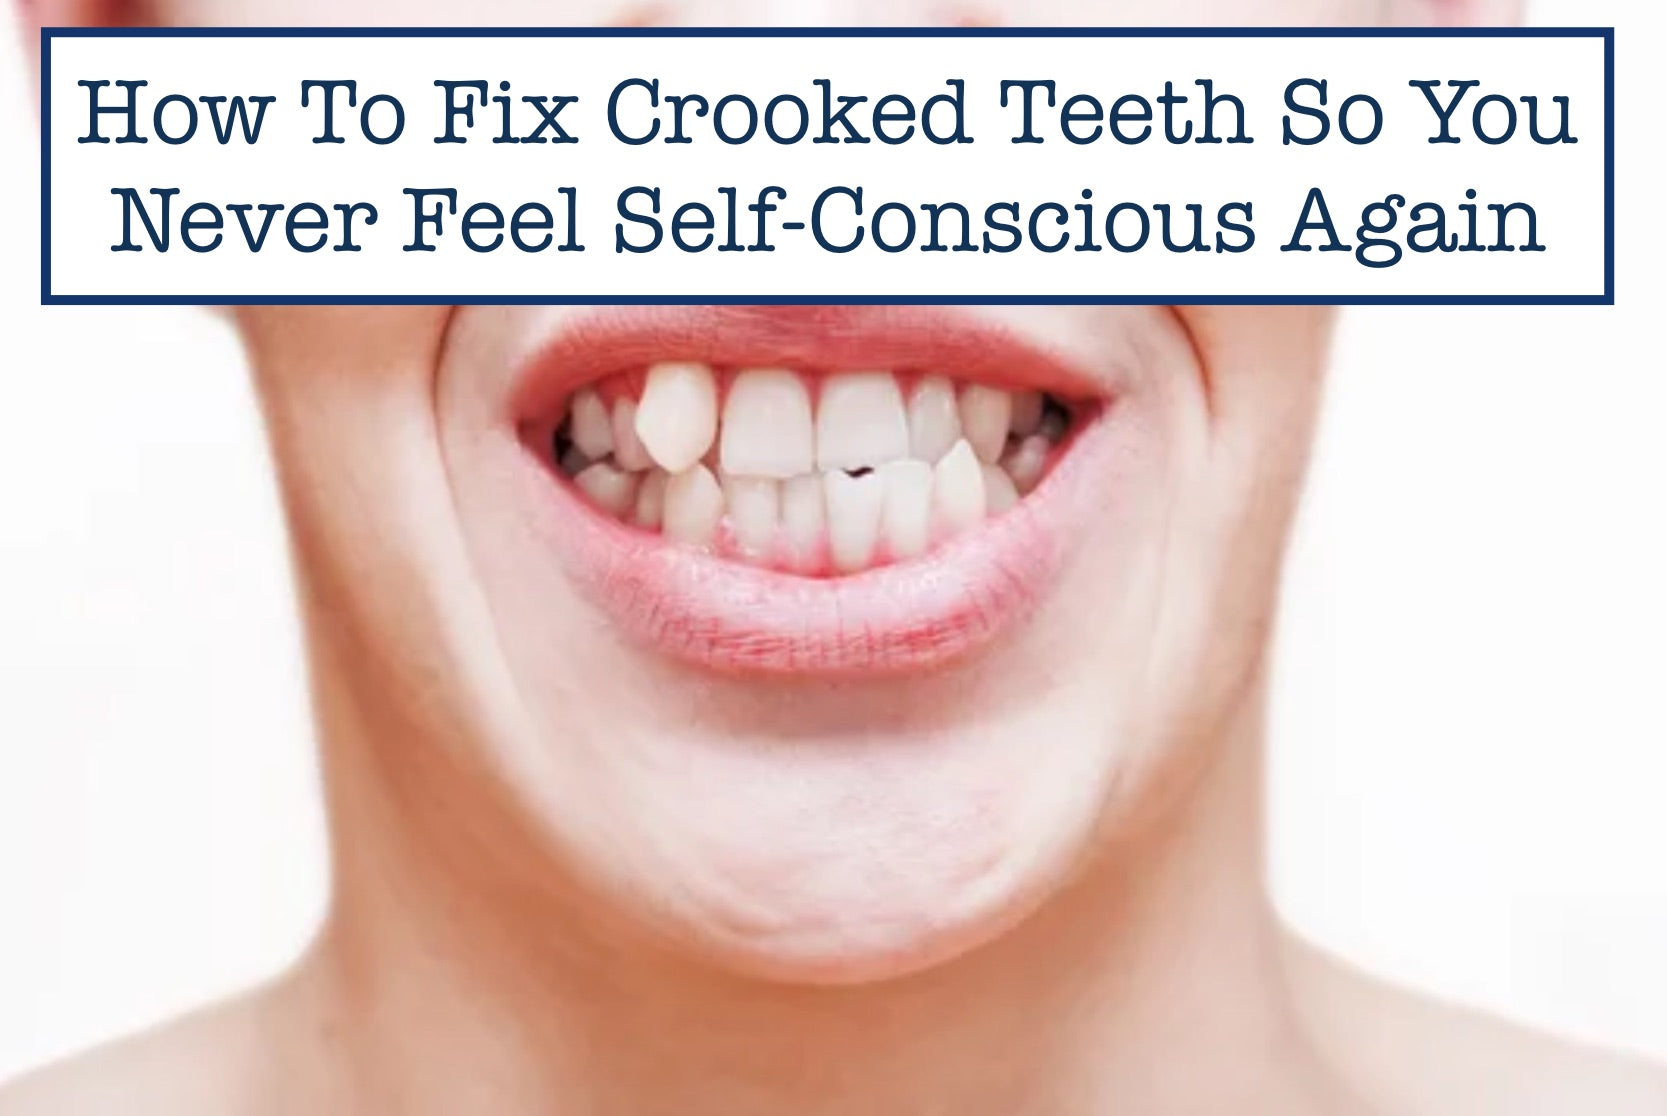 How To Fix Crooked Teeth So You Never Feel Self-Conscious Again